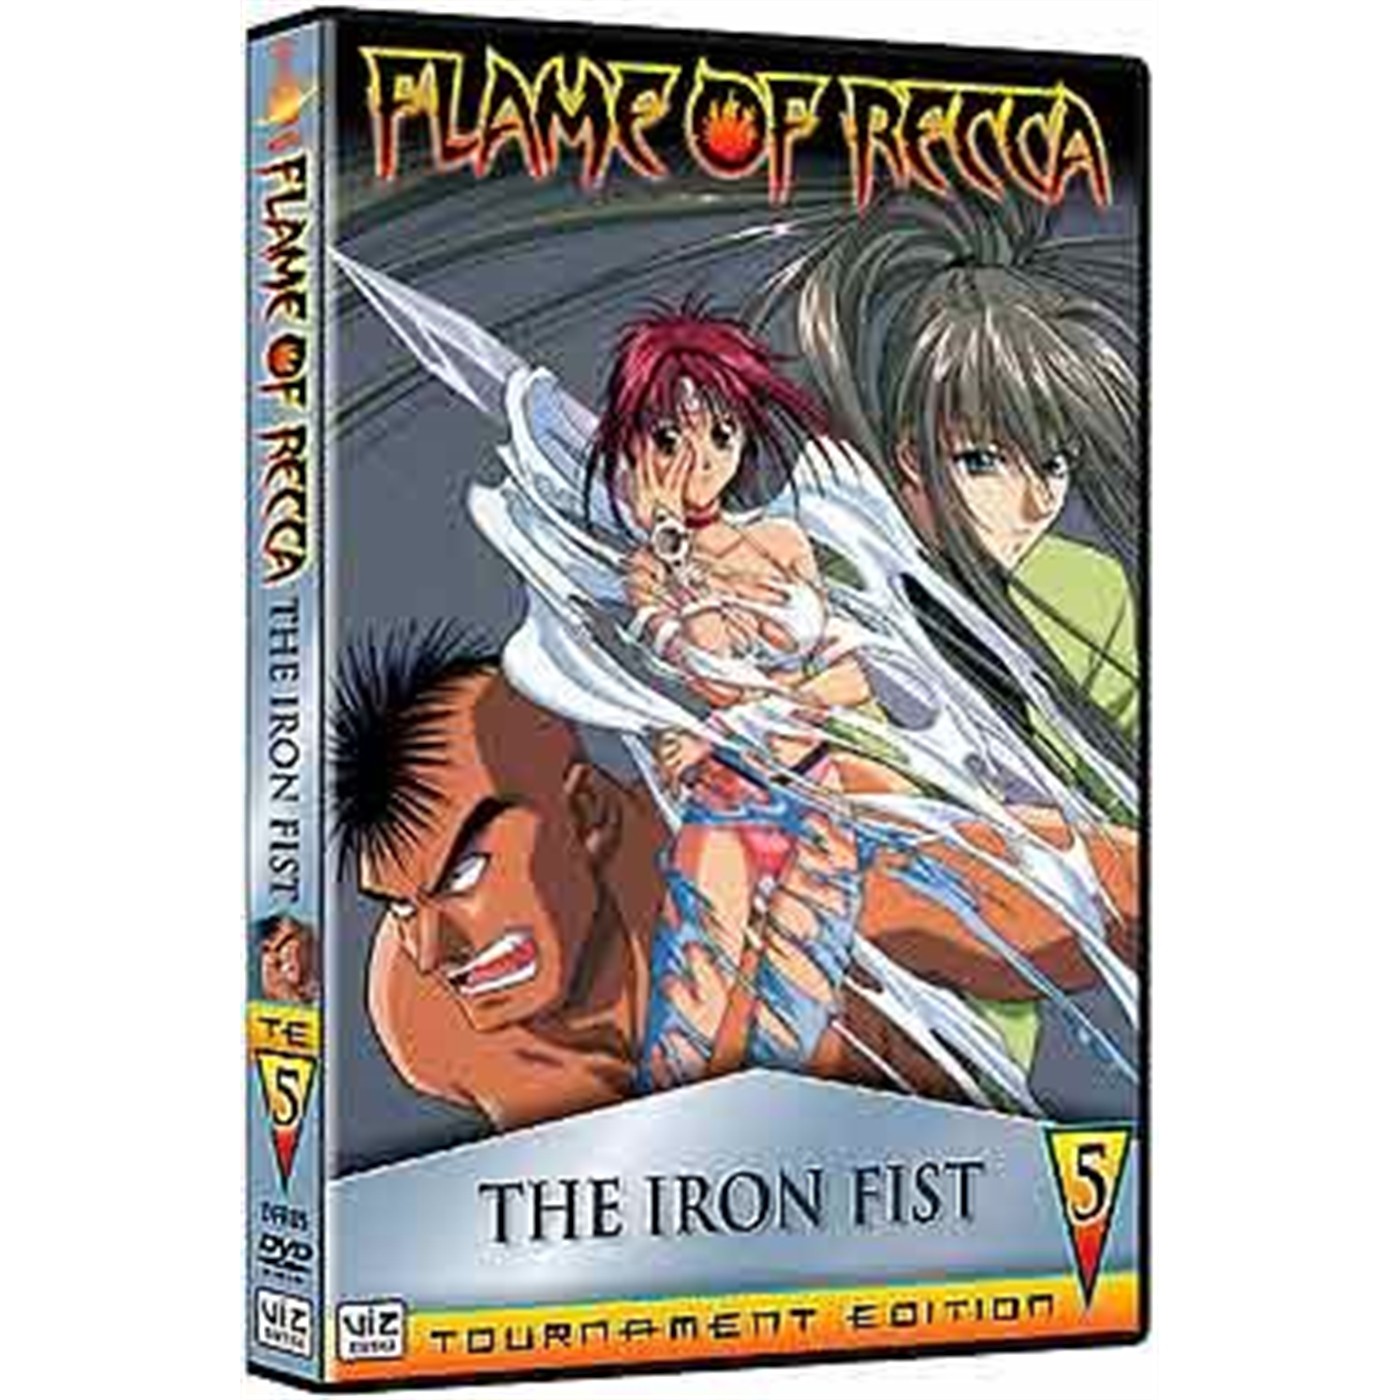 Flame of Recca, Vol. 5: The Iron Fist (DVD)